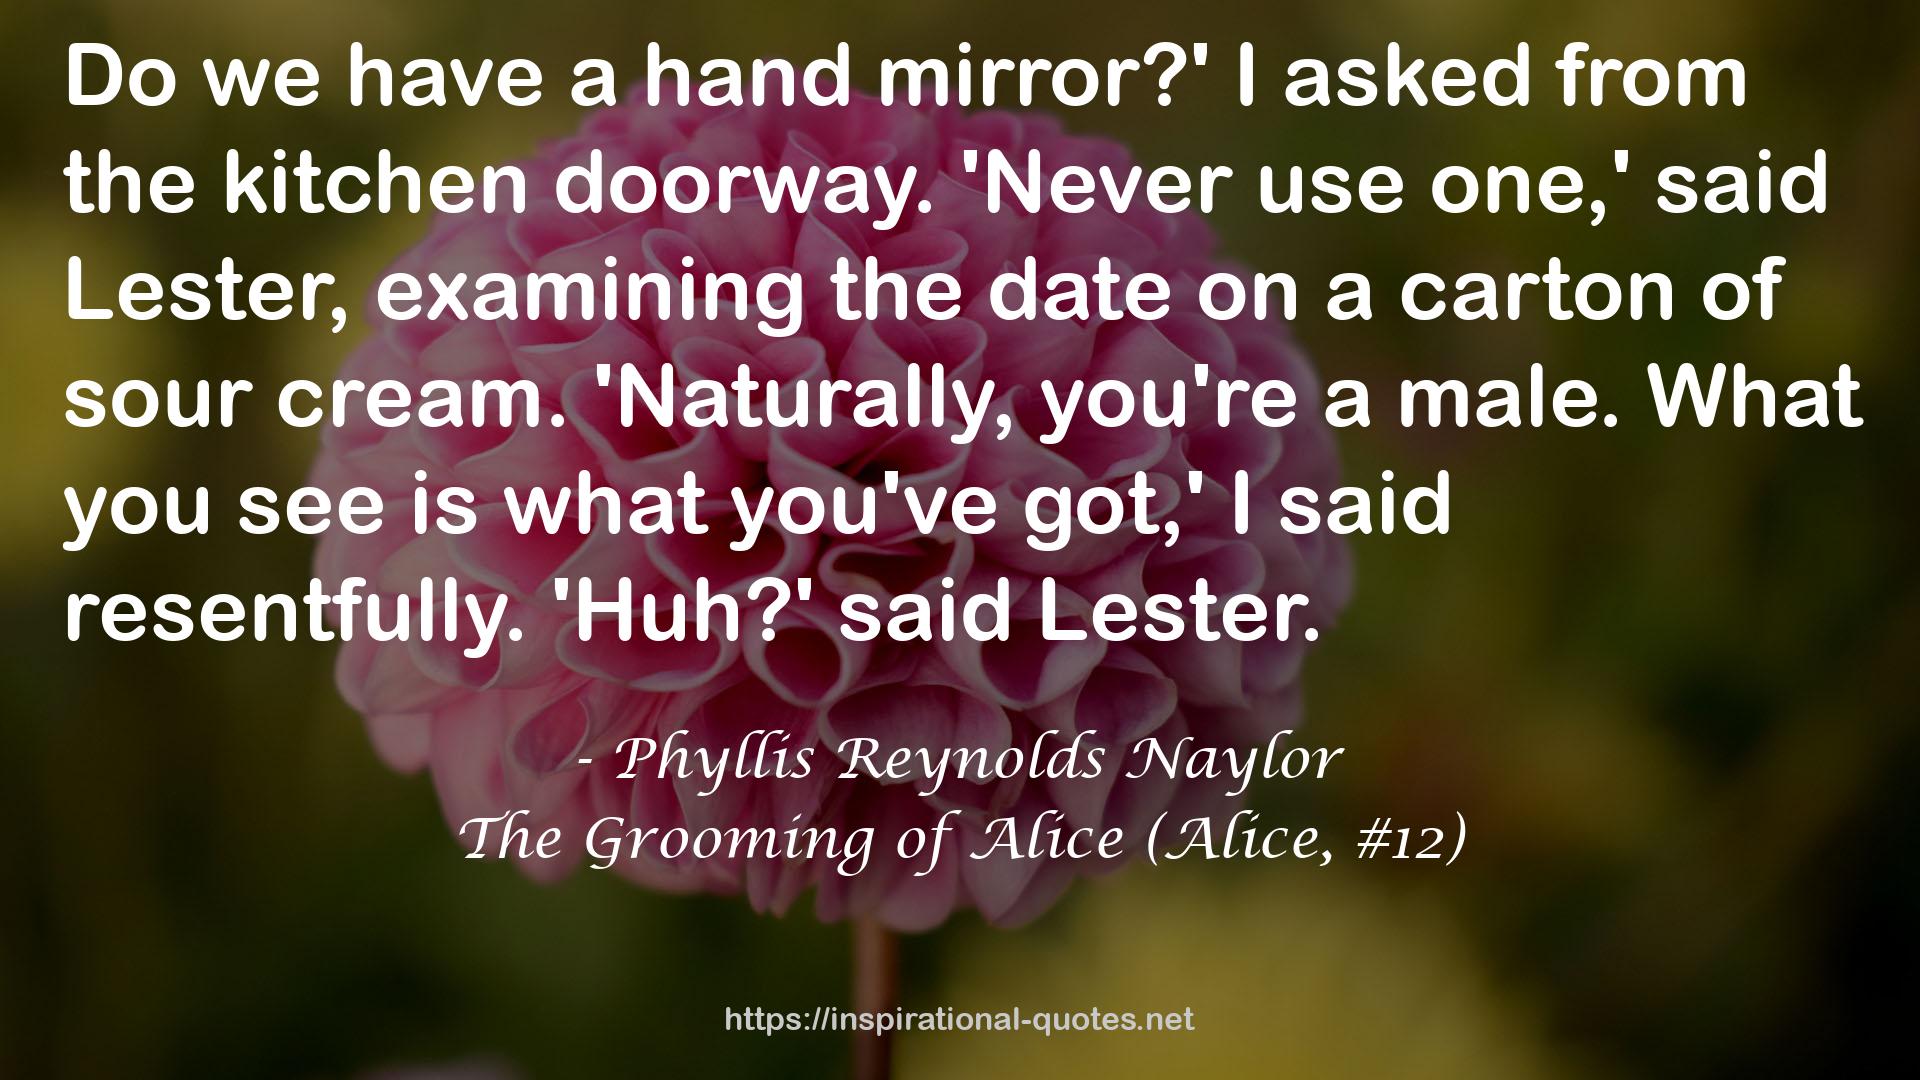 The Grooming of Alice (Alice, #12) QUOTES